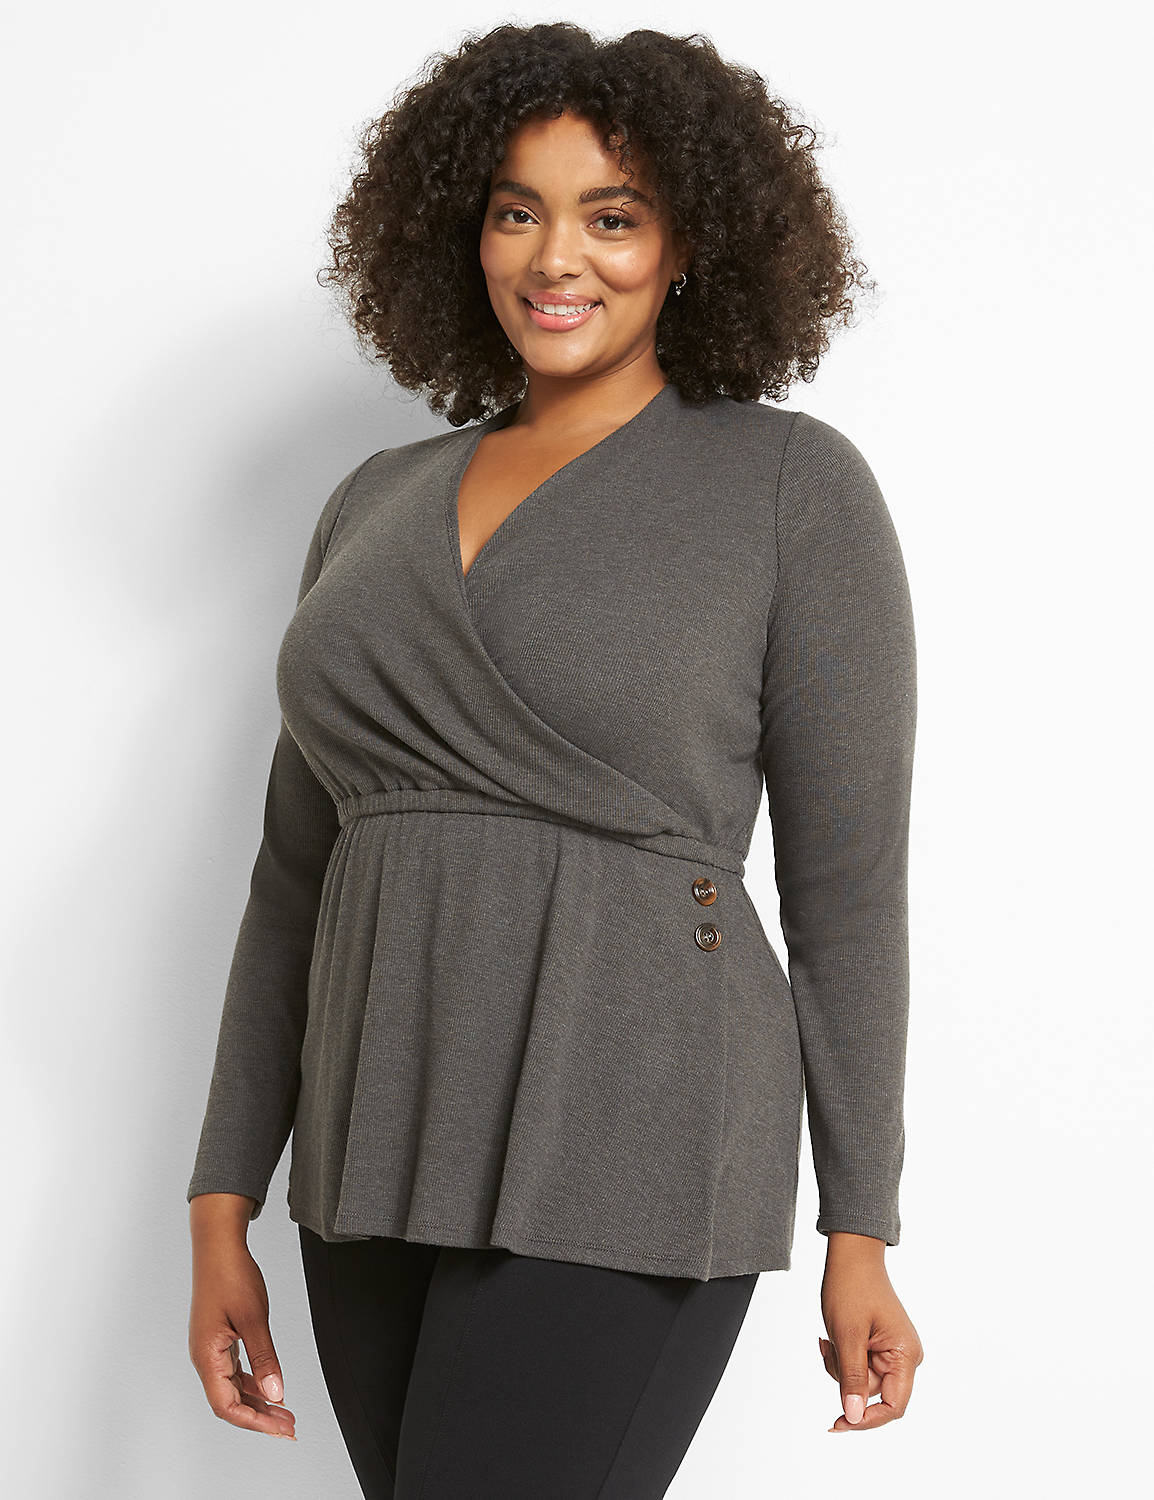 Long Sleeve Faux Wrap Knit Top With Buttons In Rib 1122633:B65 Dark Heather Grey:10/12 Product Image 1